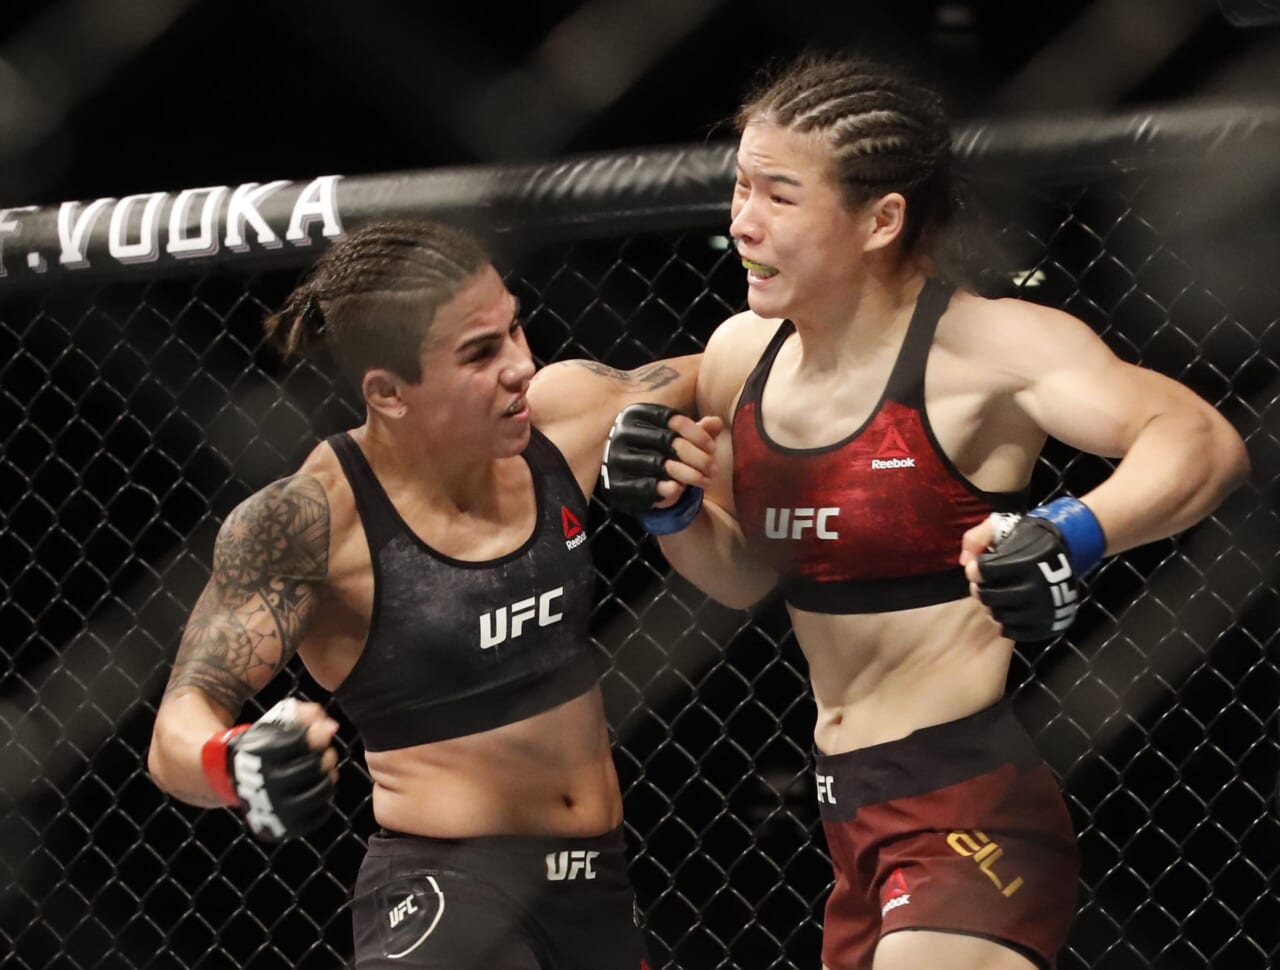 After sensational win at UFC Vegas 52, what’s next for Jessica Andrade?